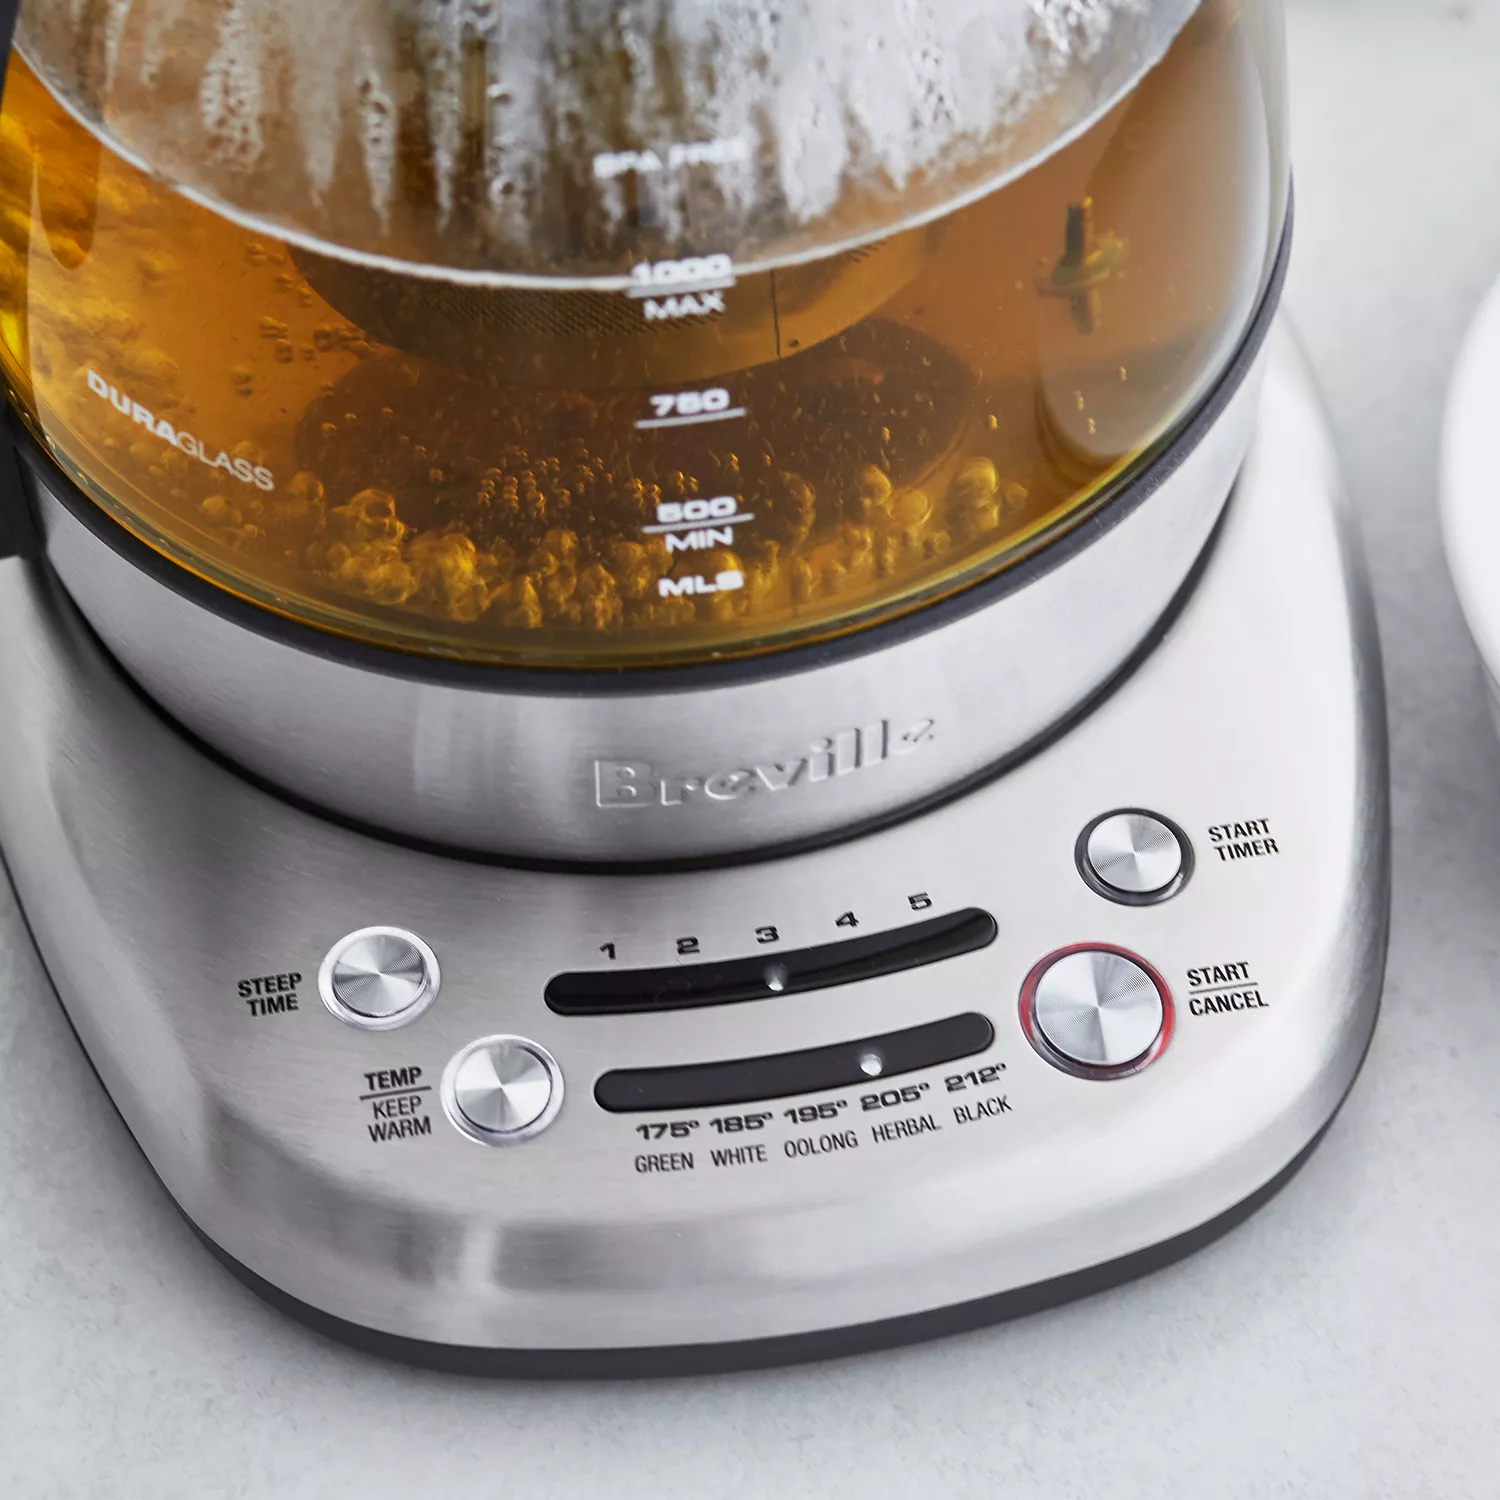 the Breville Smart Tea Infuser™ Compact